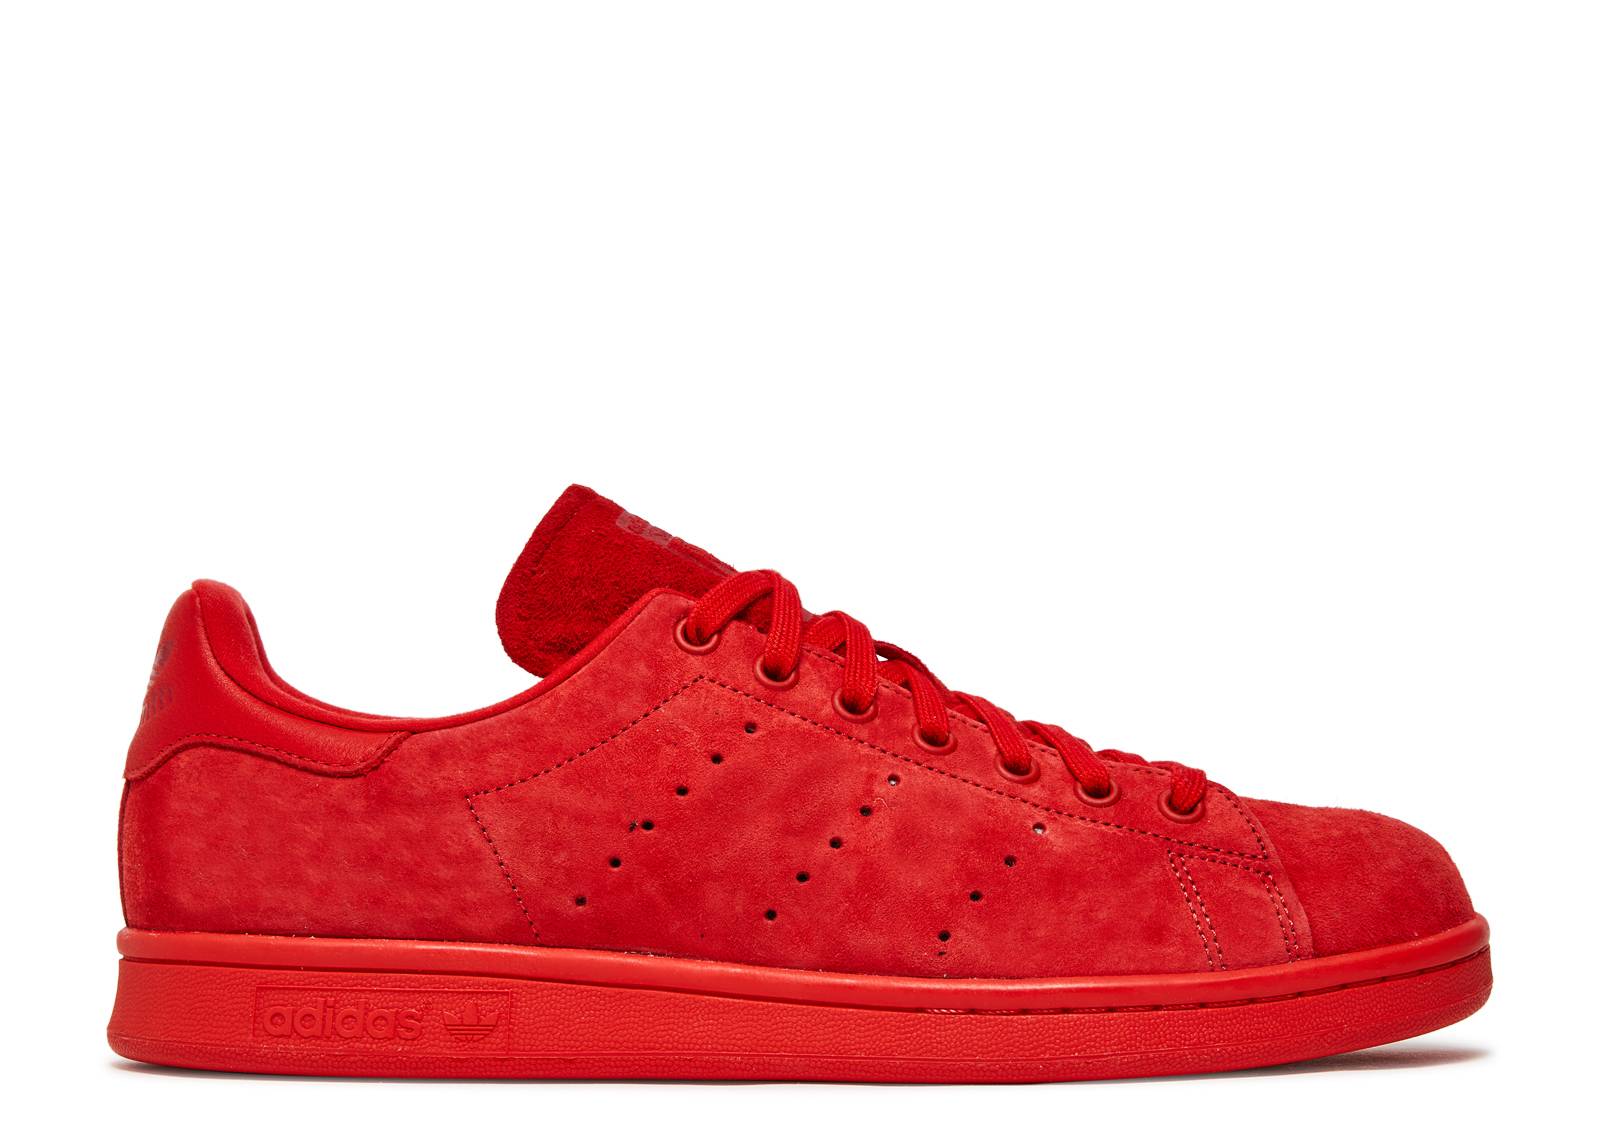 Stan Smith 'Power Red'